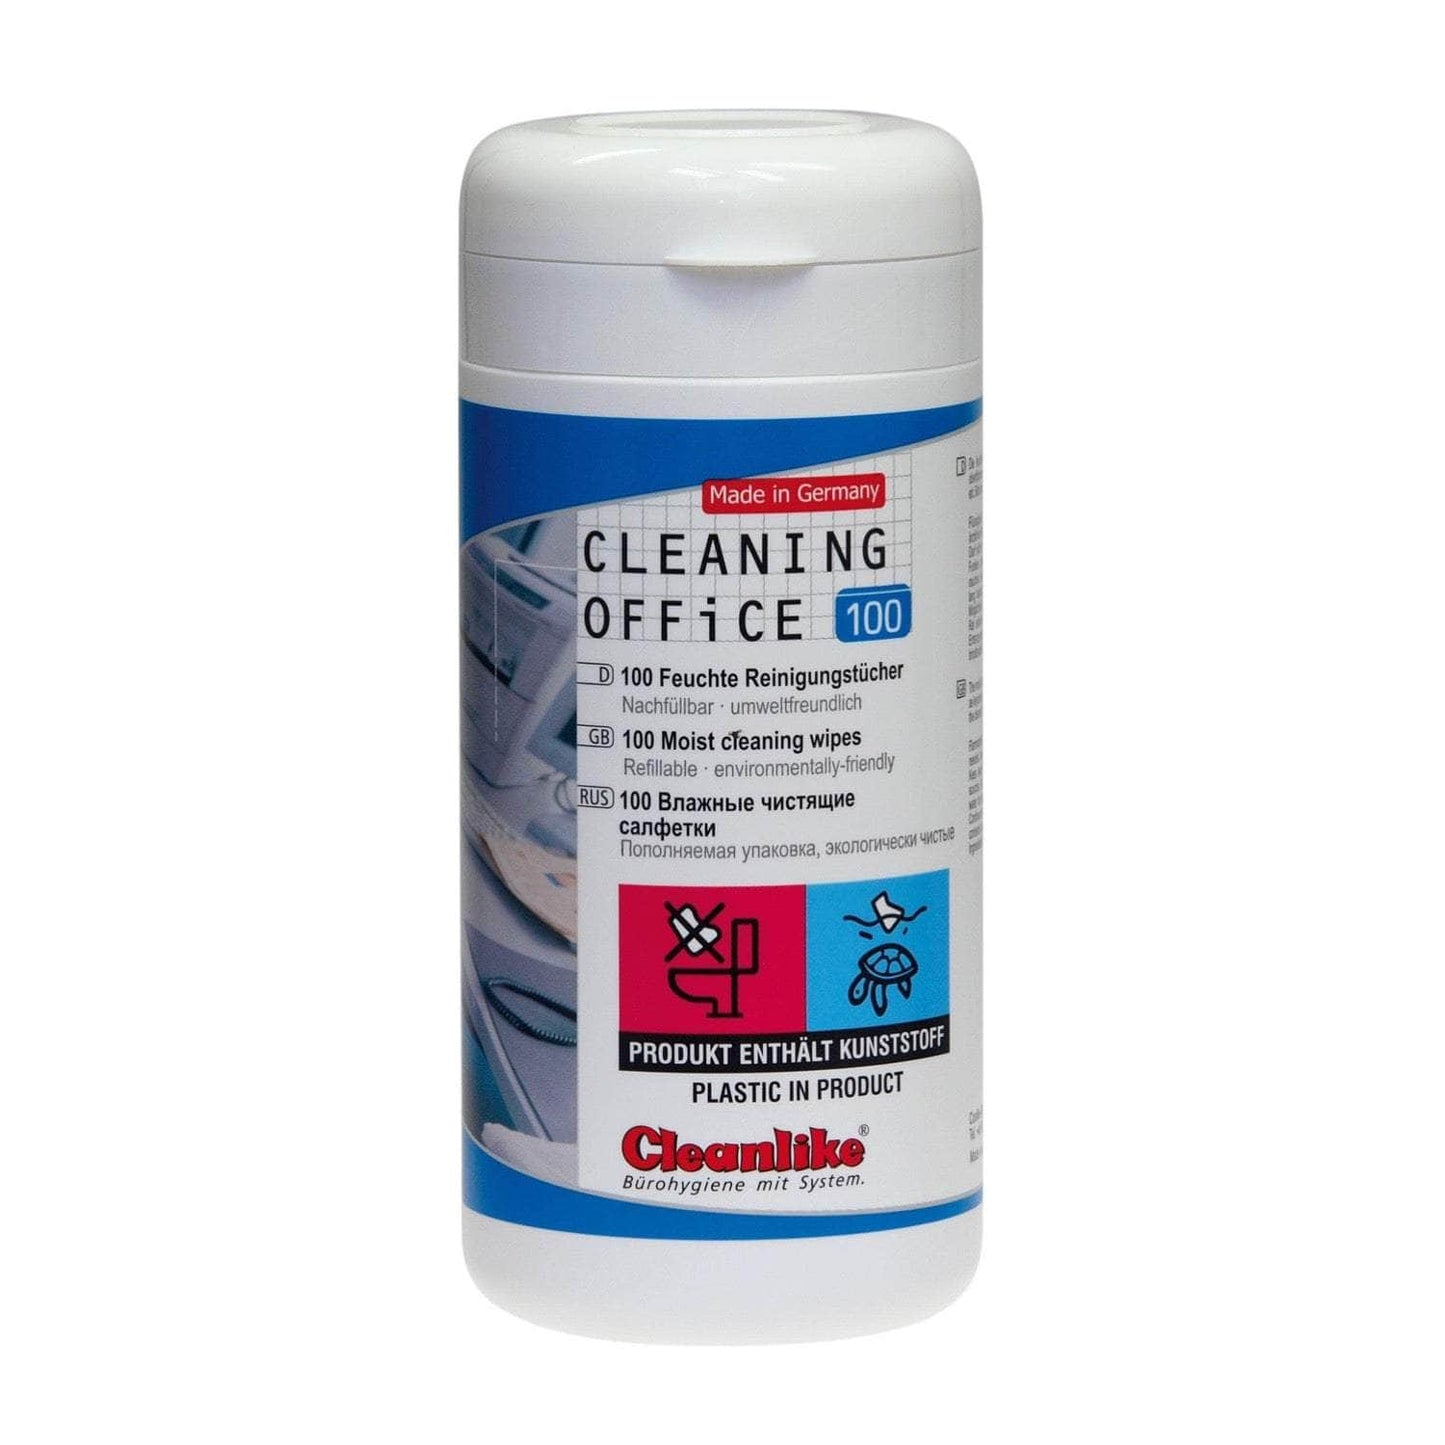 Cleanlike Cleaning Office surface cleaning wipes in a can